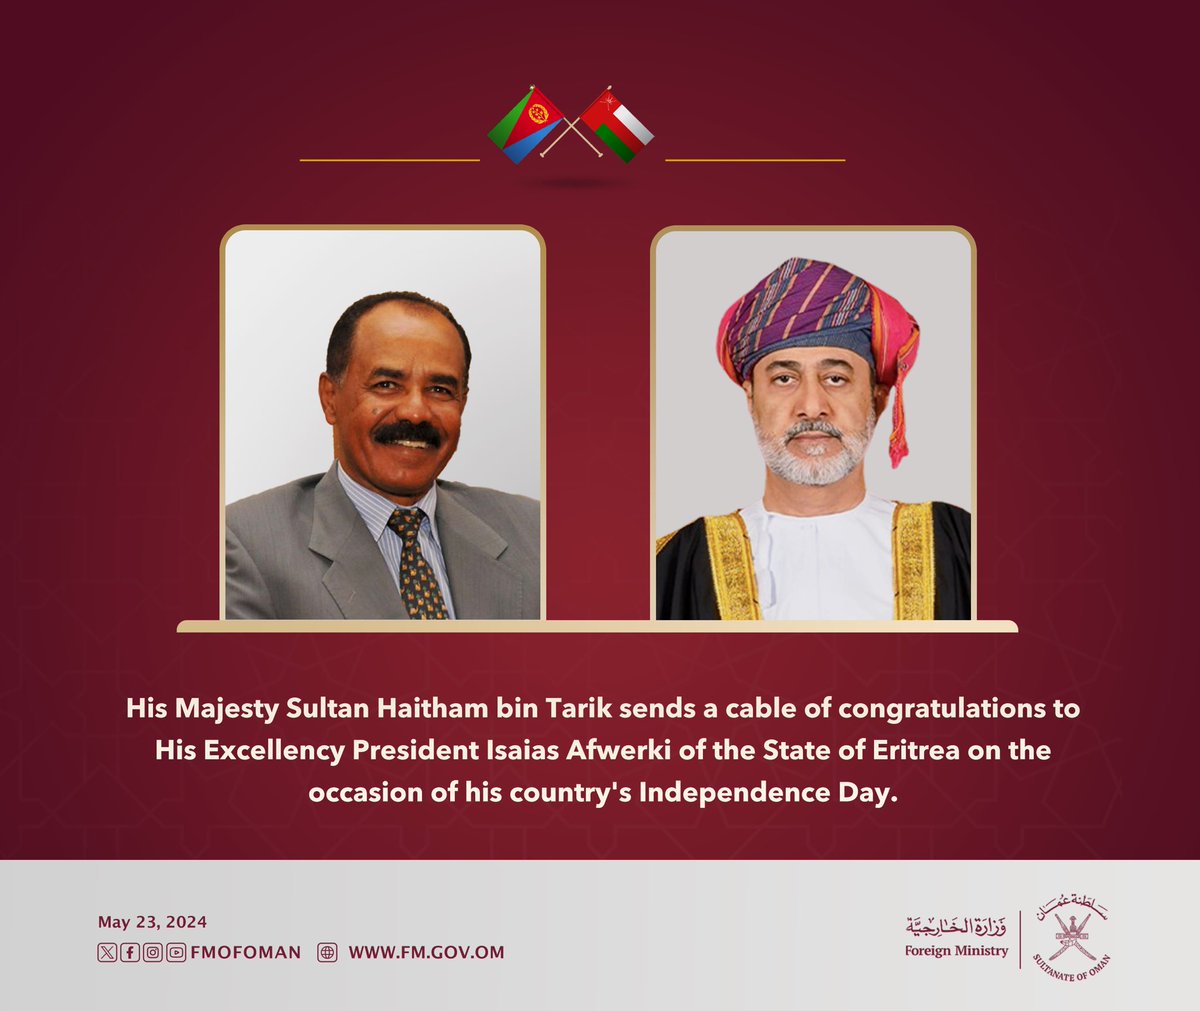 His Majesty the Sultan sends a cable of congratulations to His Excellency President Isaias Afwerki of the State of #Eritrea on the occasion of his country's Independence Day.